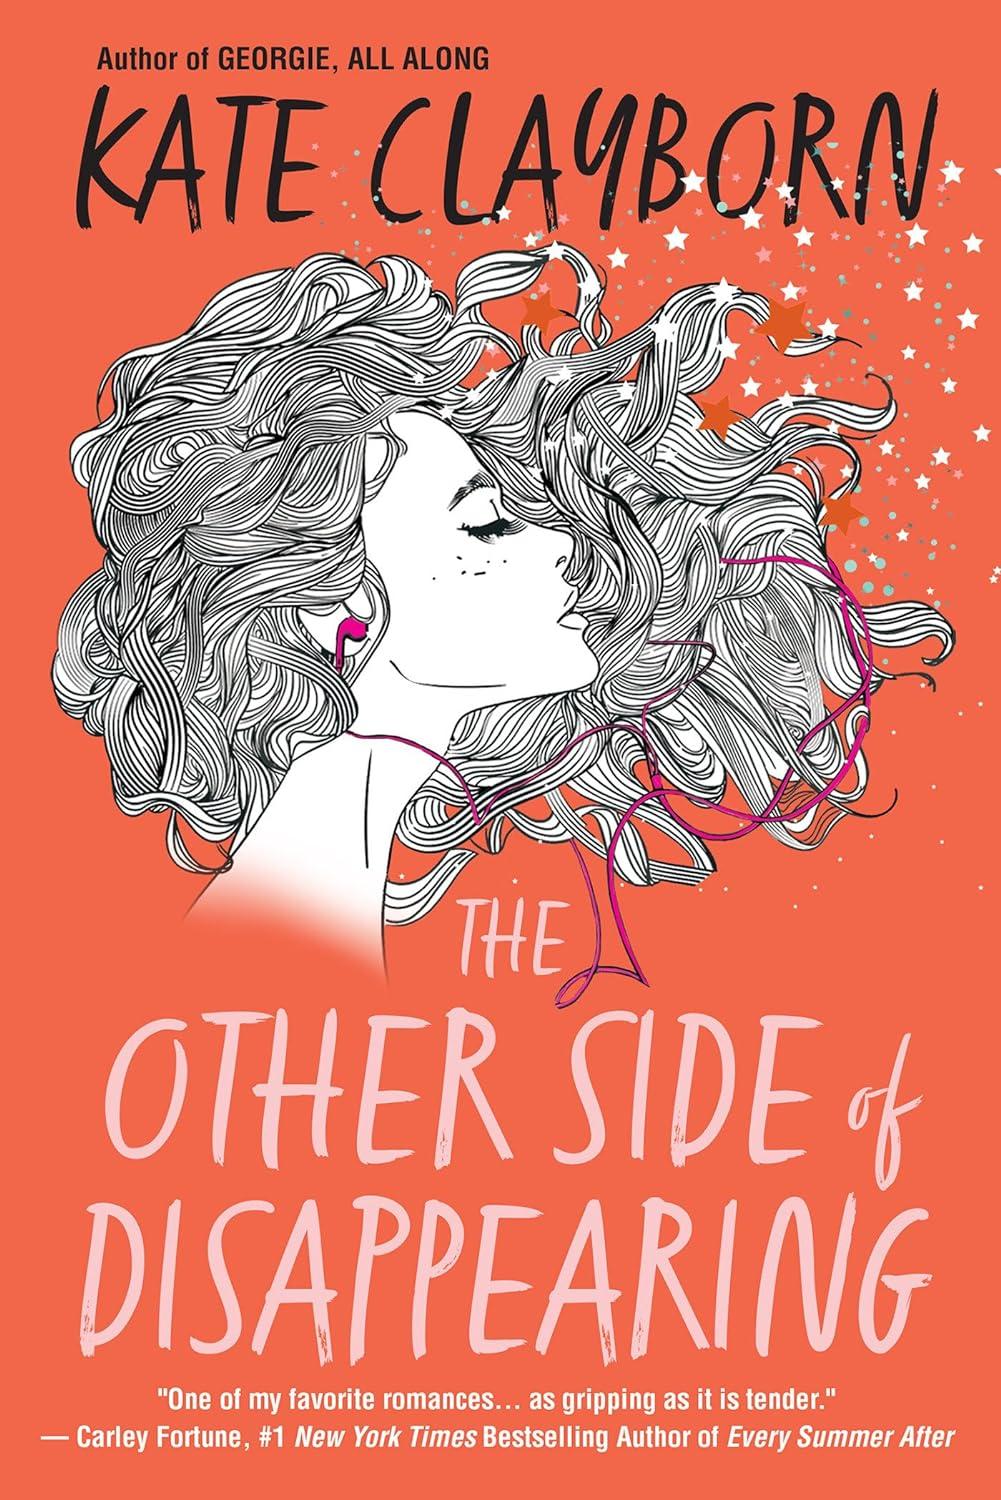 The Other Side of Disappearing